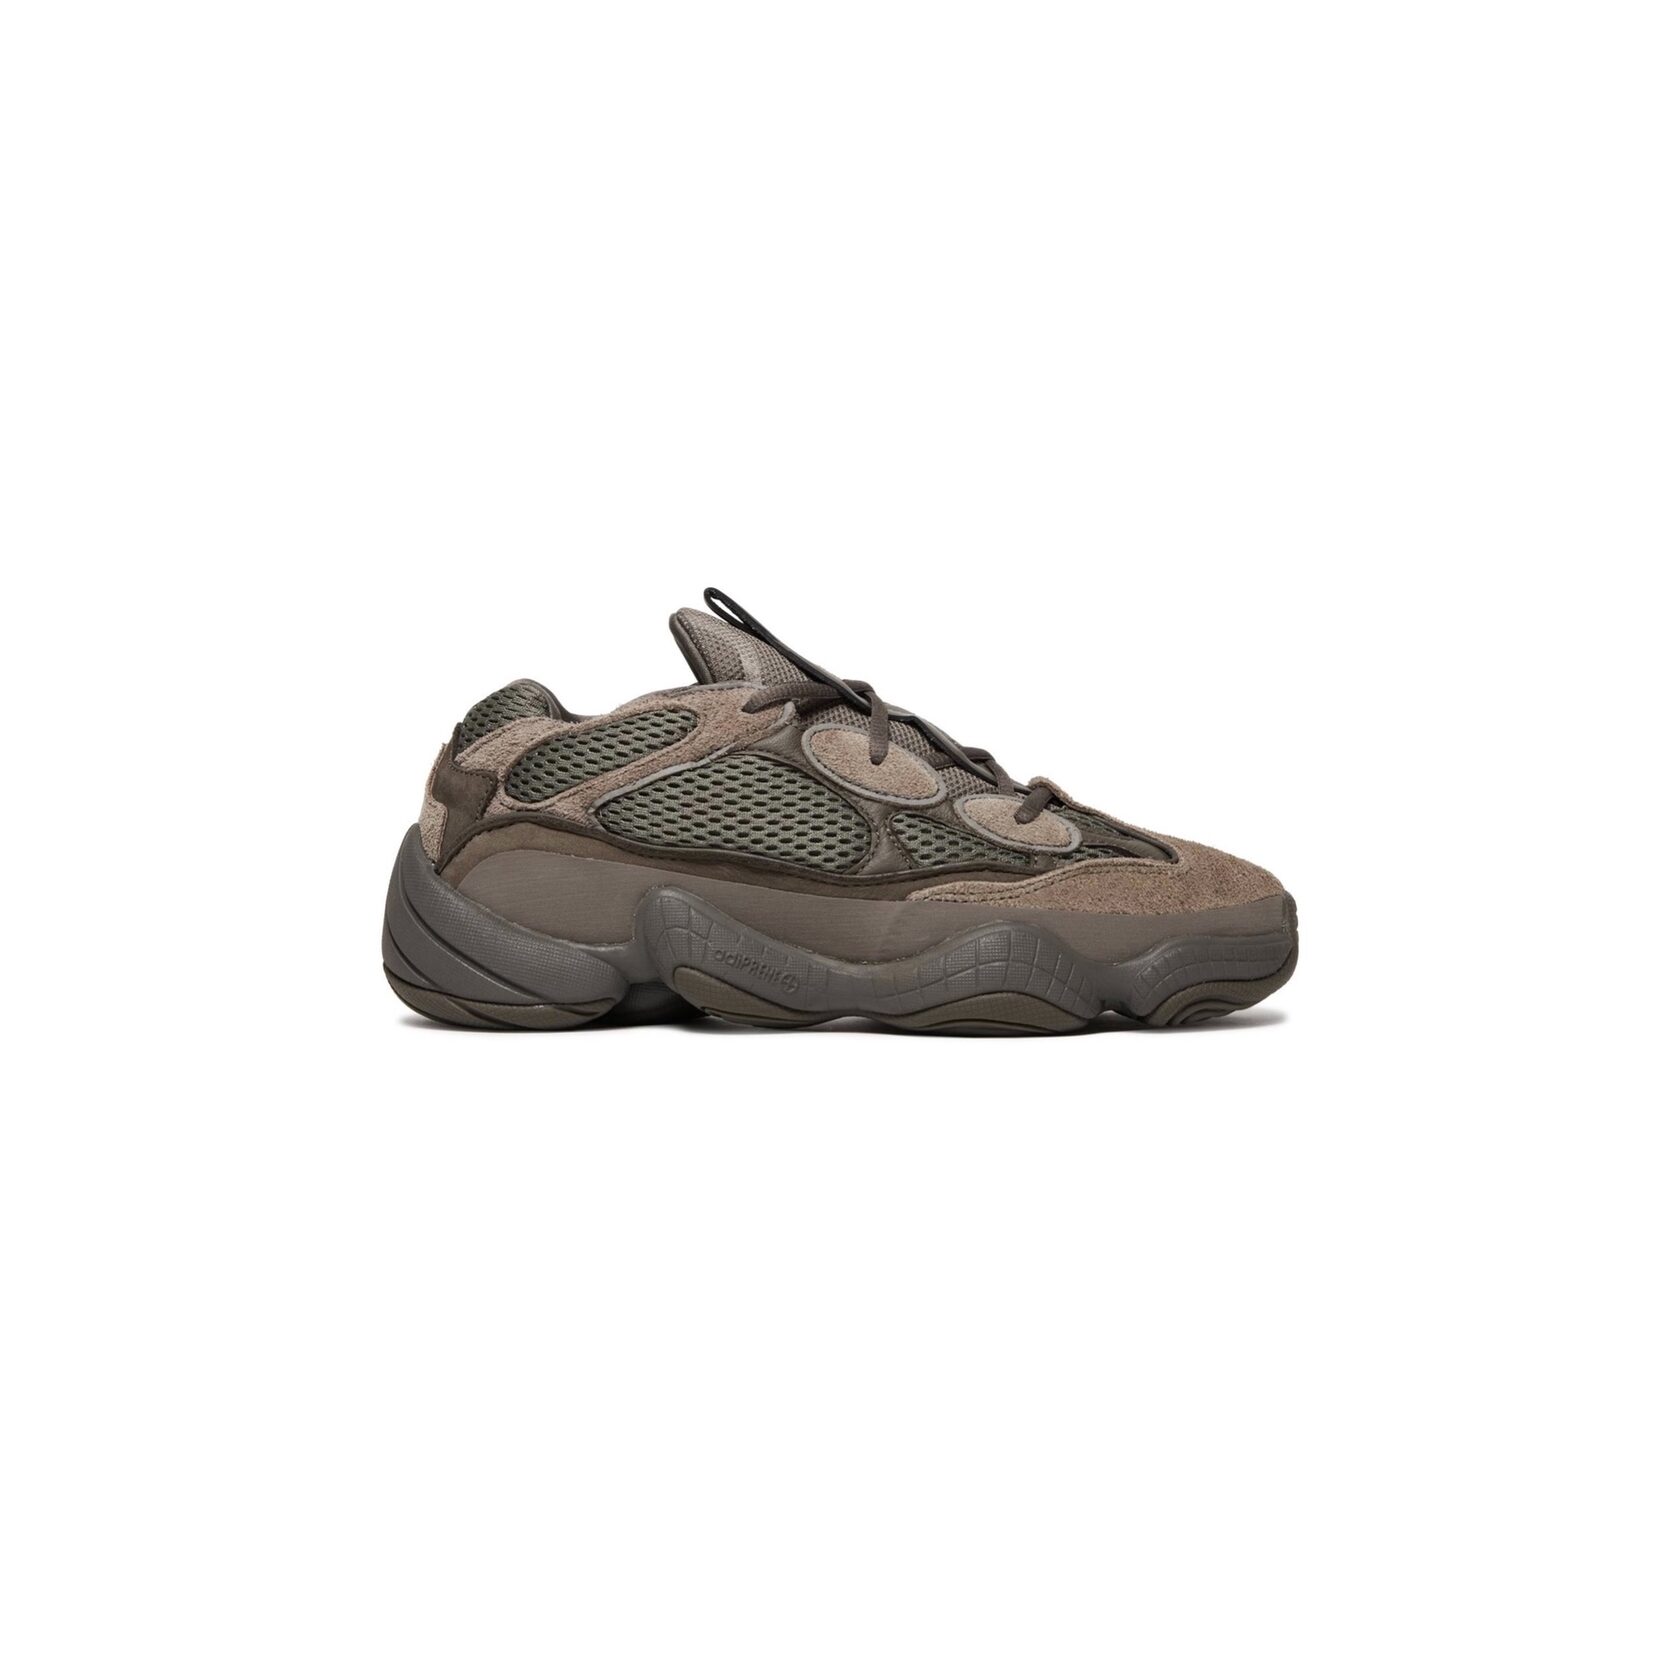 Yeezy 500 Clay Brown. Adidas Yeezy 500 Clay Brown.